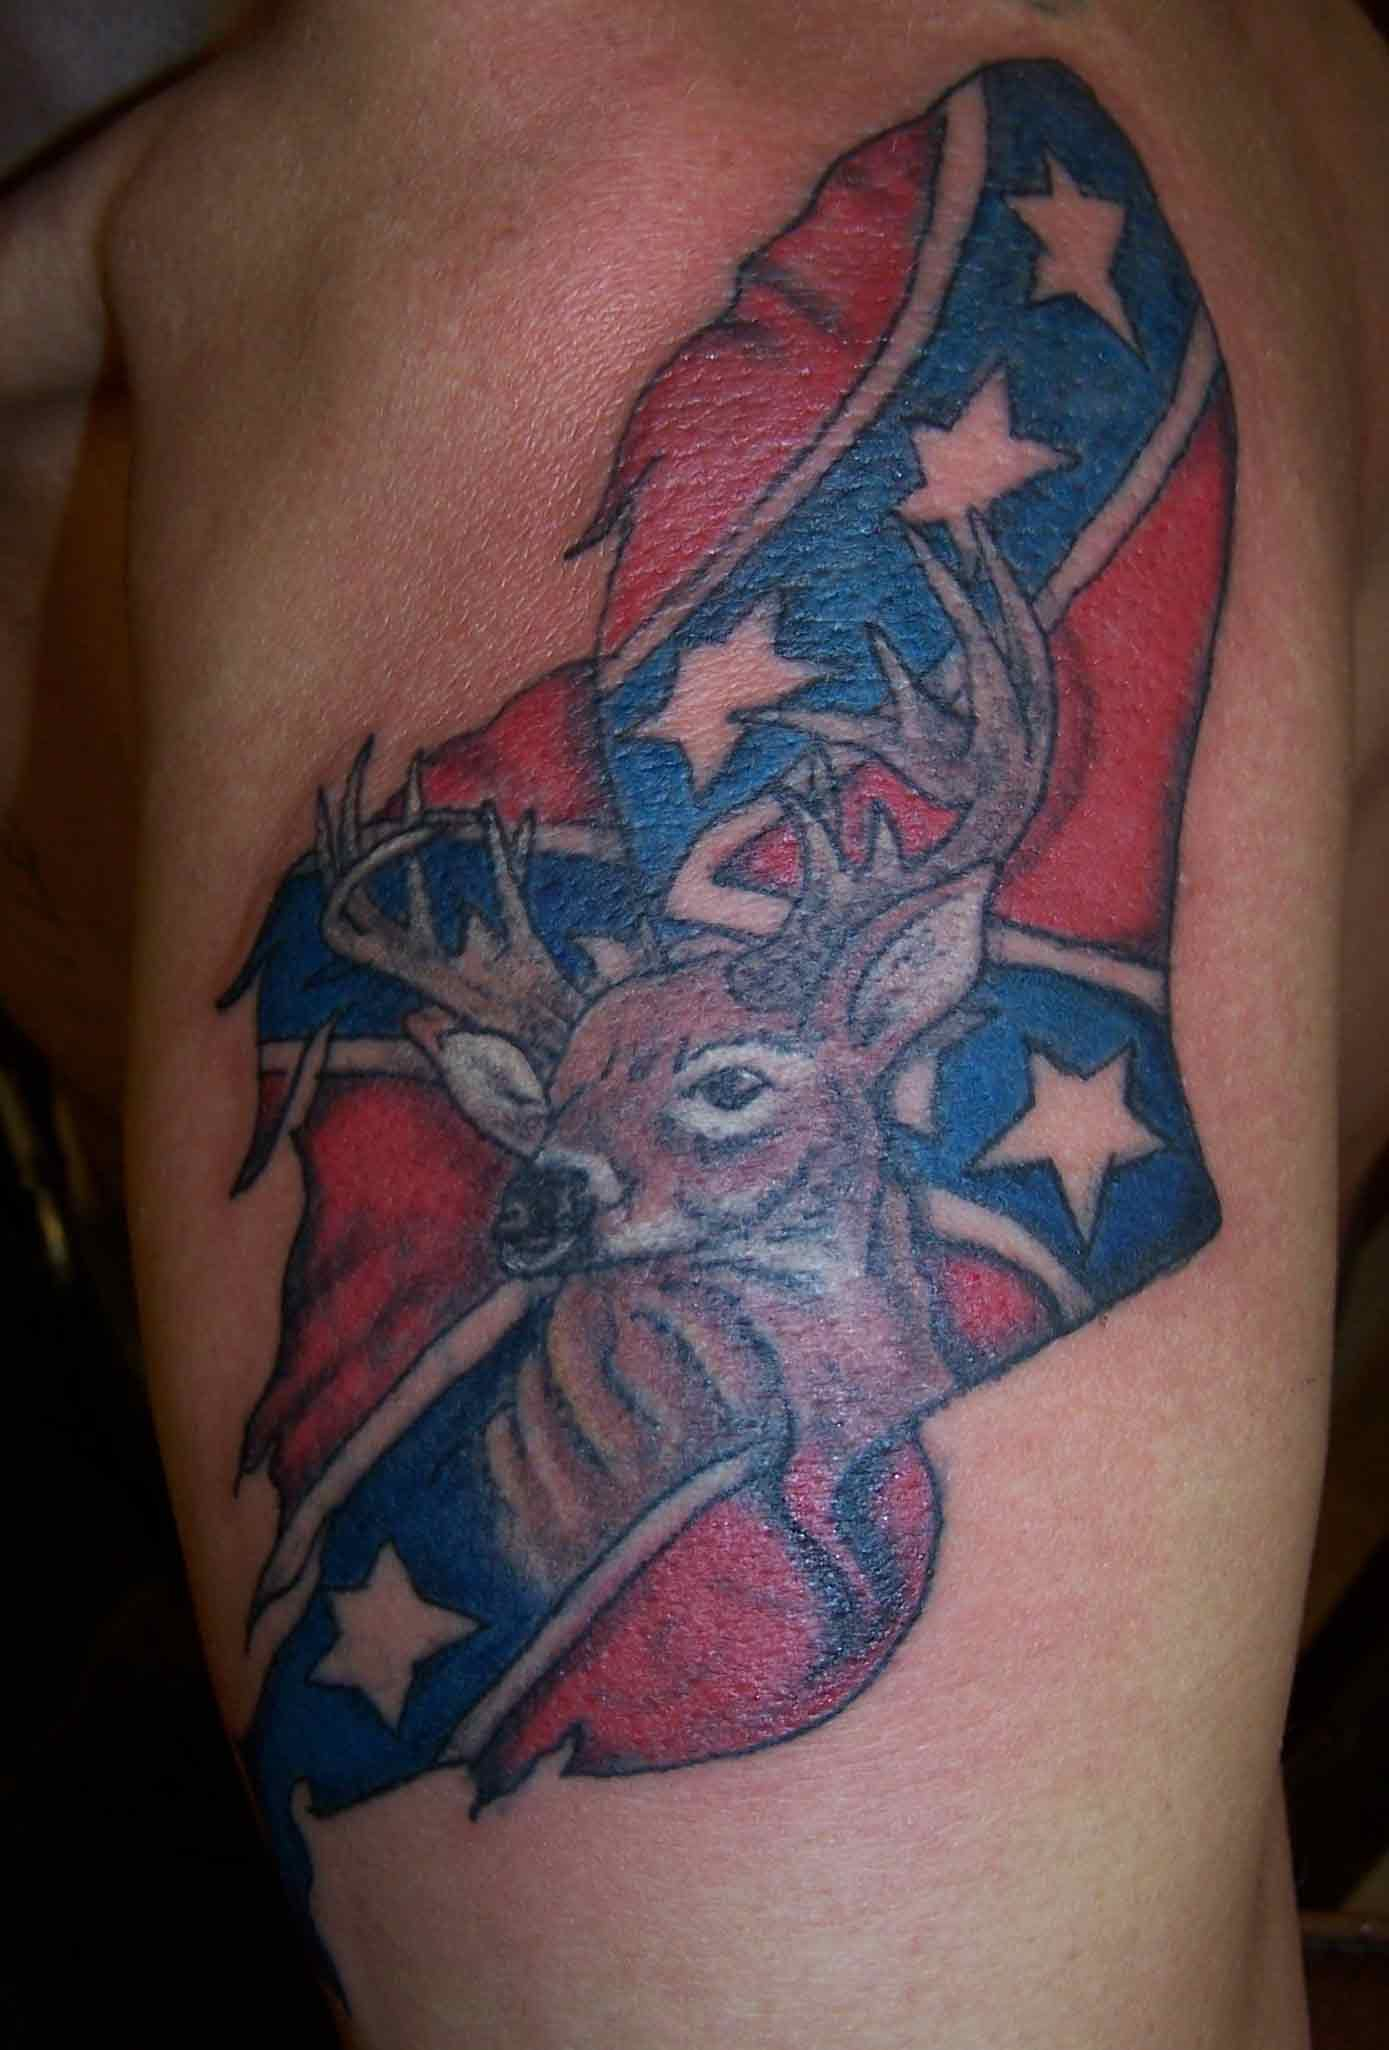 45 Rebel Flag Tattoos with measurements 1389 X 2050